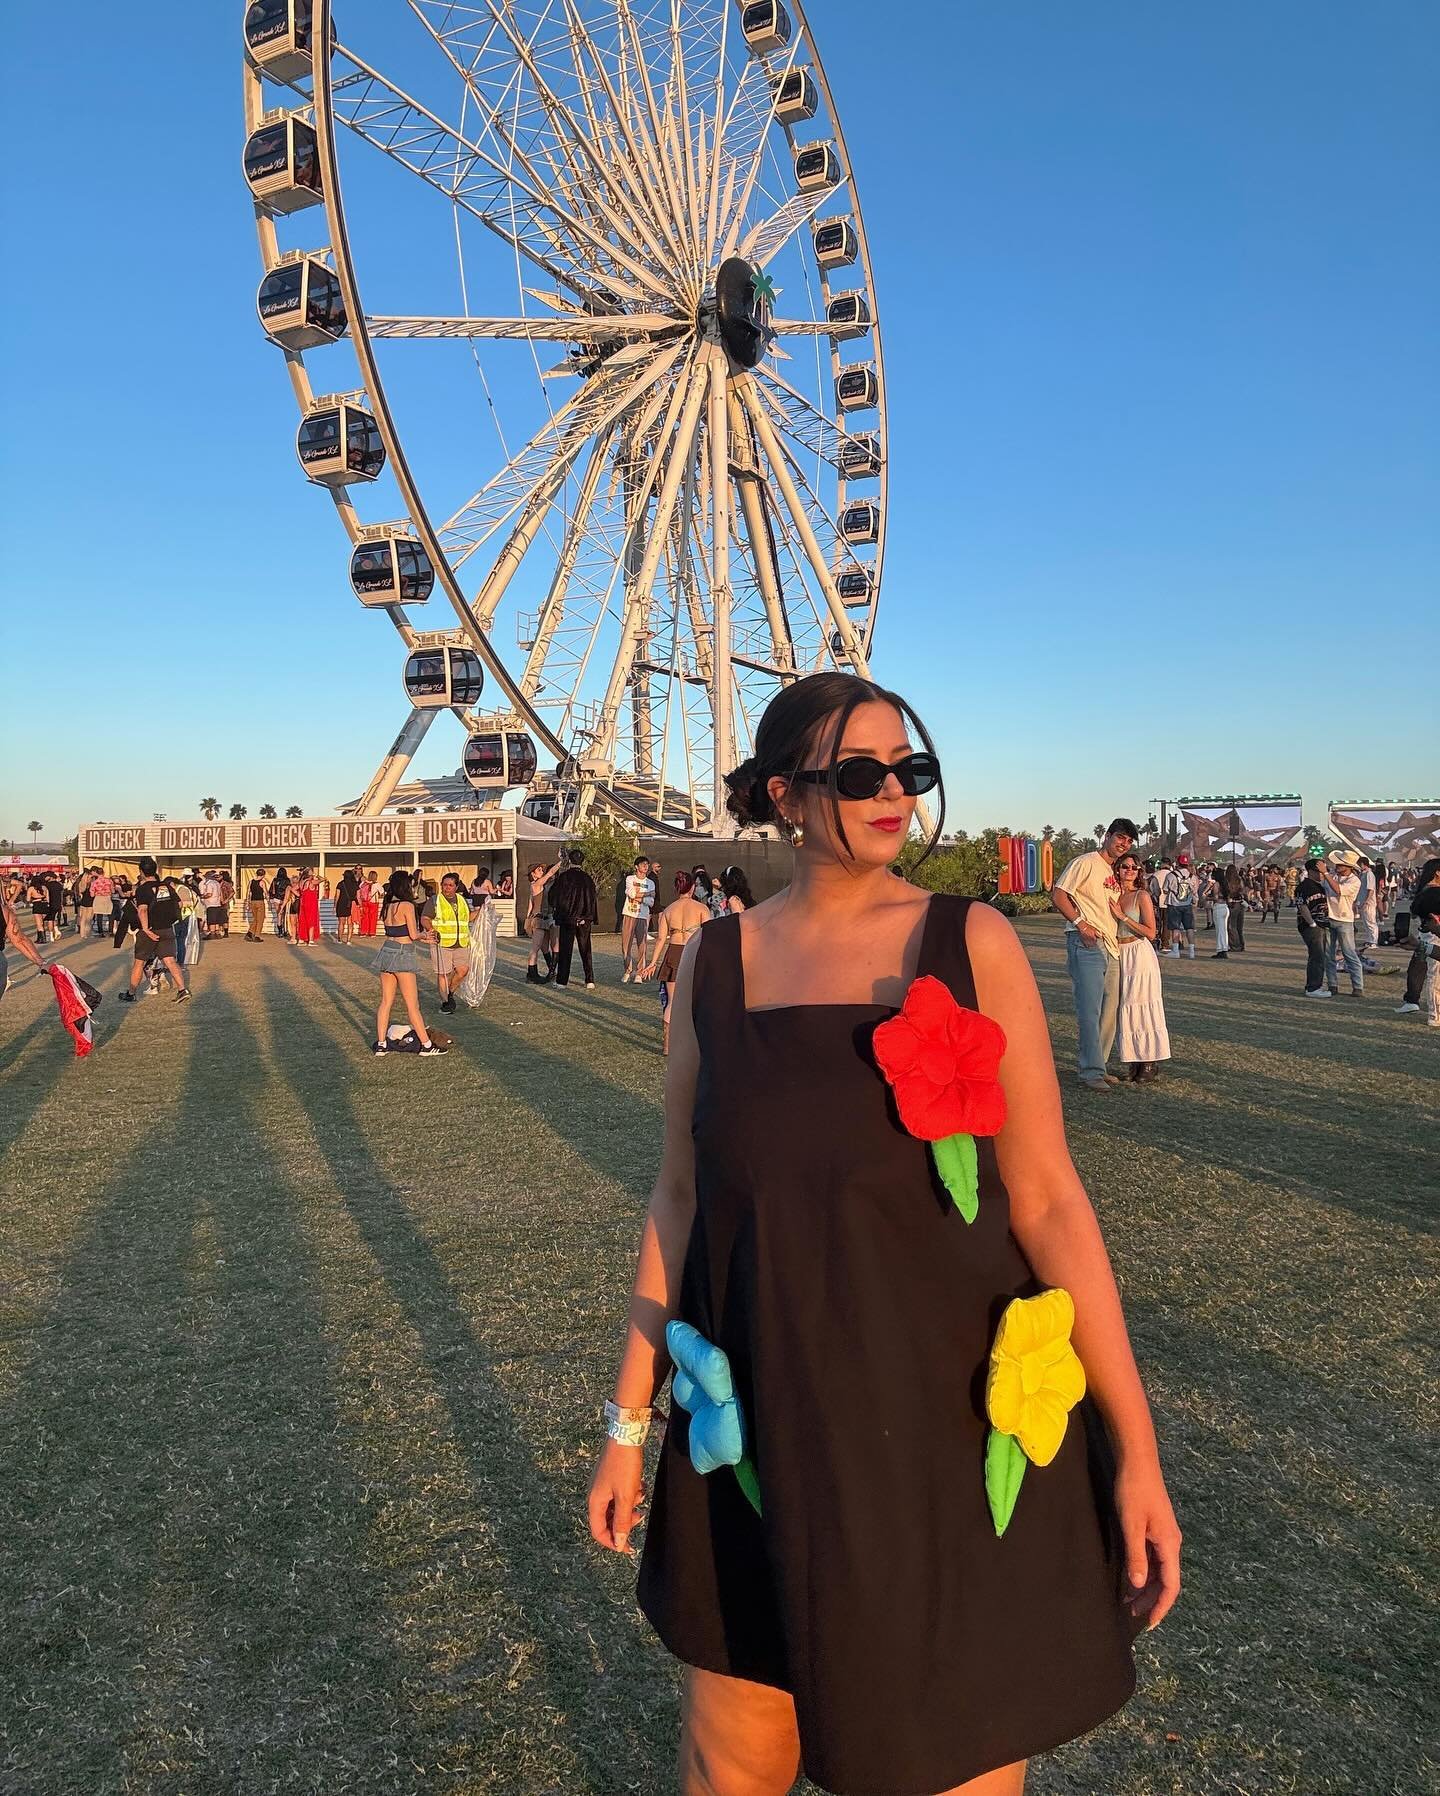 saved the best fit for last 🌹🌹🌹 how can you *not* have fun while wearing this dress?! @nuuly #nuulypartner #cluubnuuly #festivalfashion #coachella